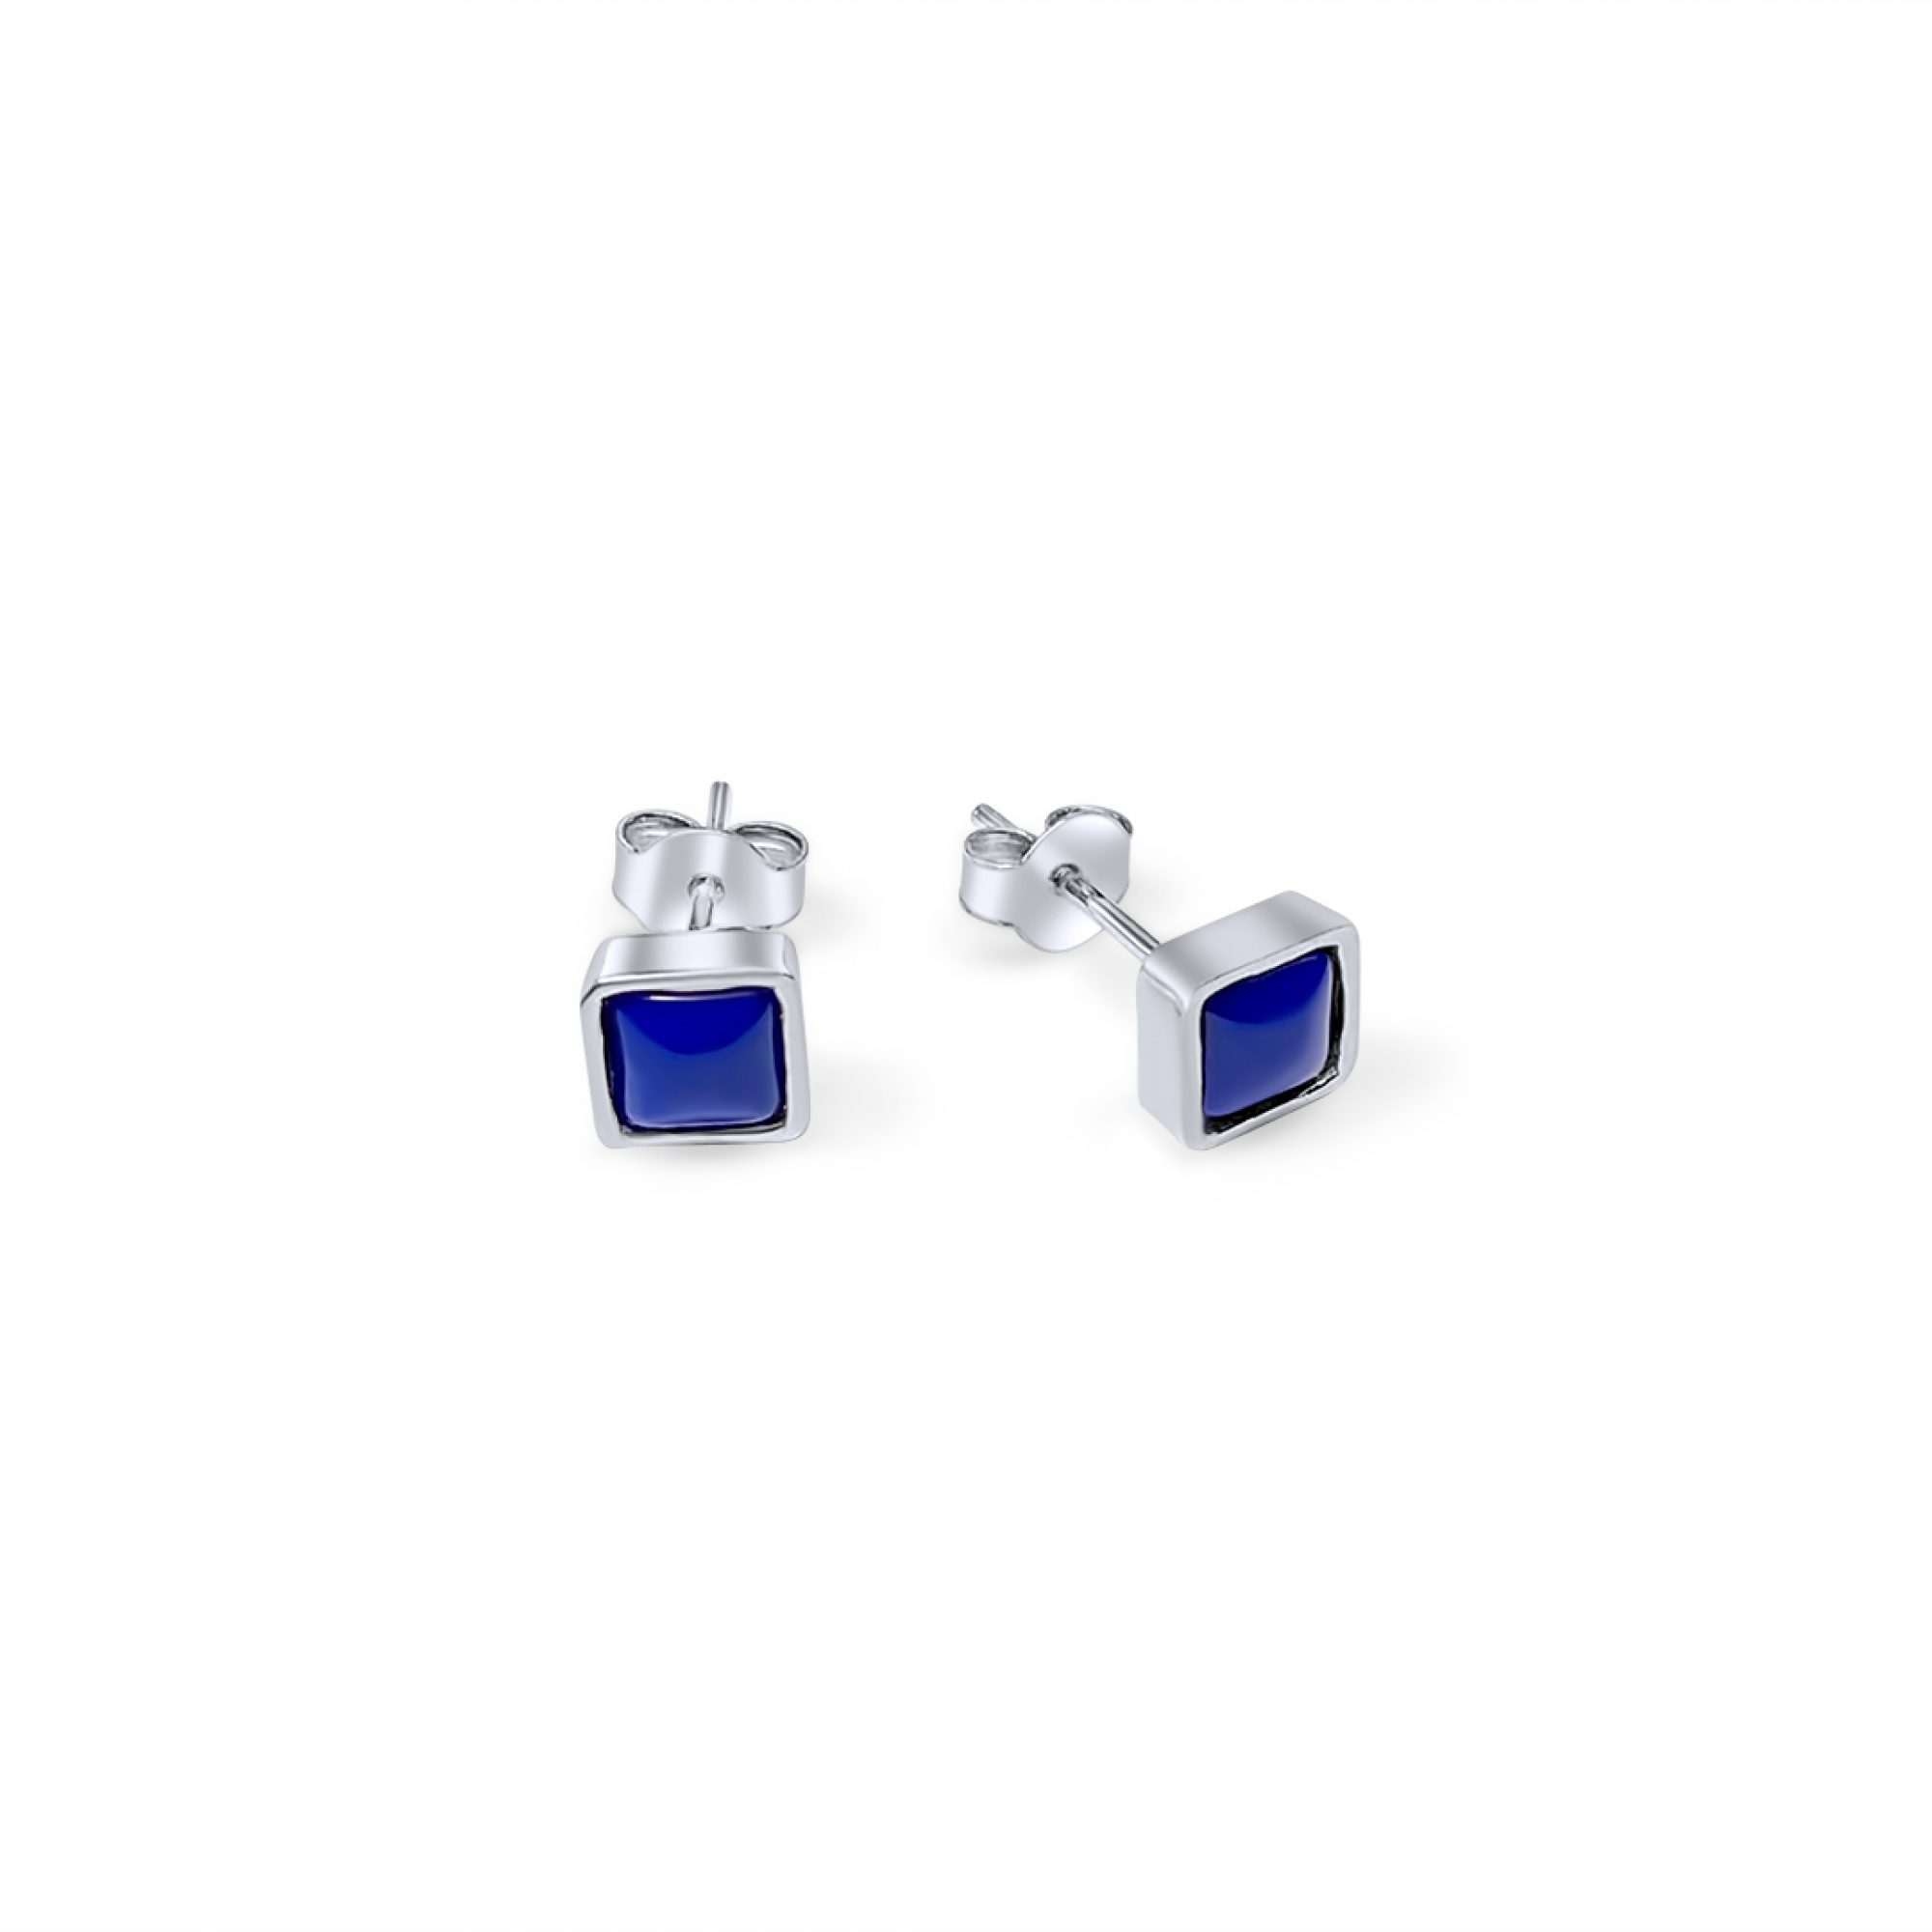 Silver stud earrings with lapis lazuli stones